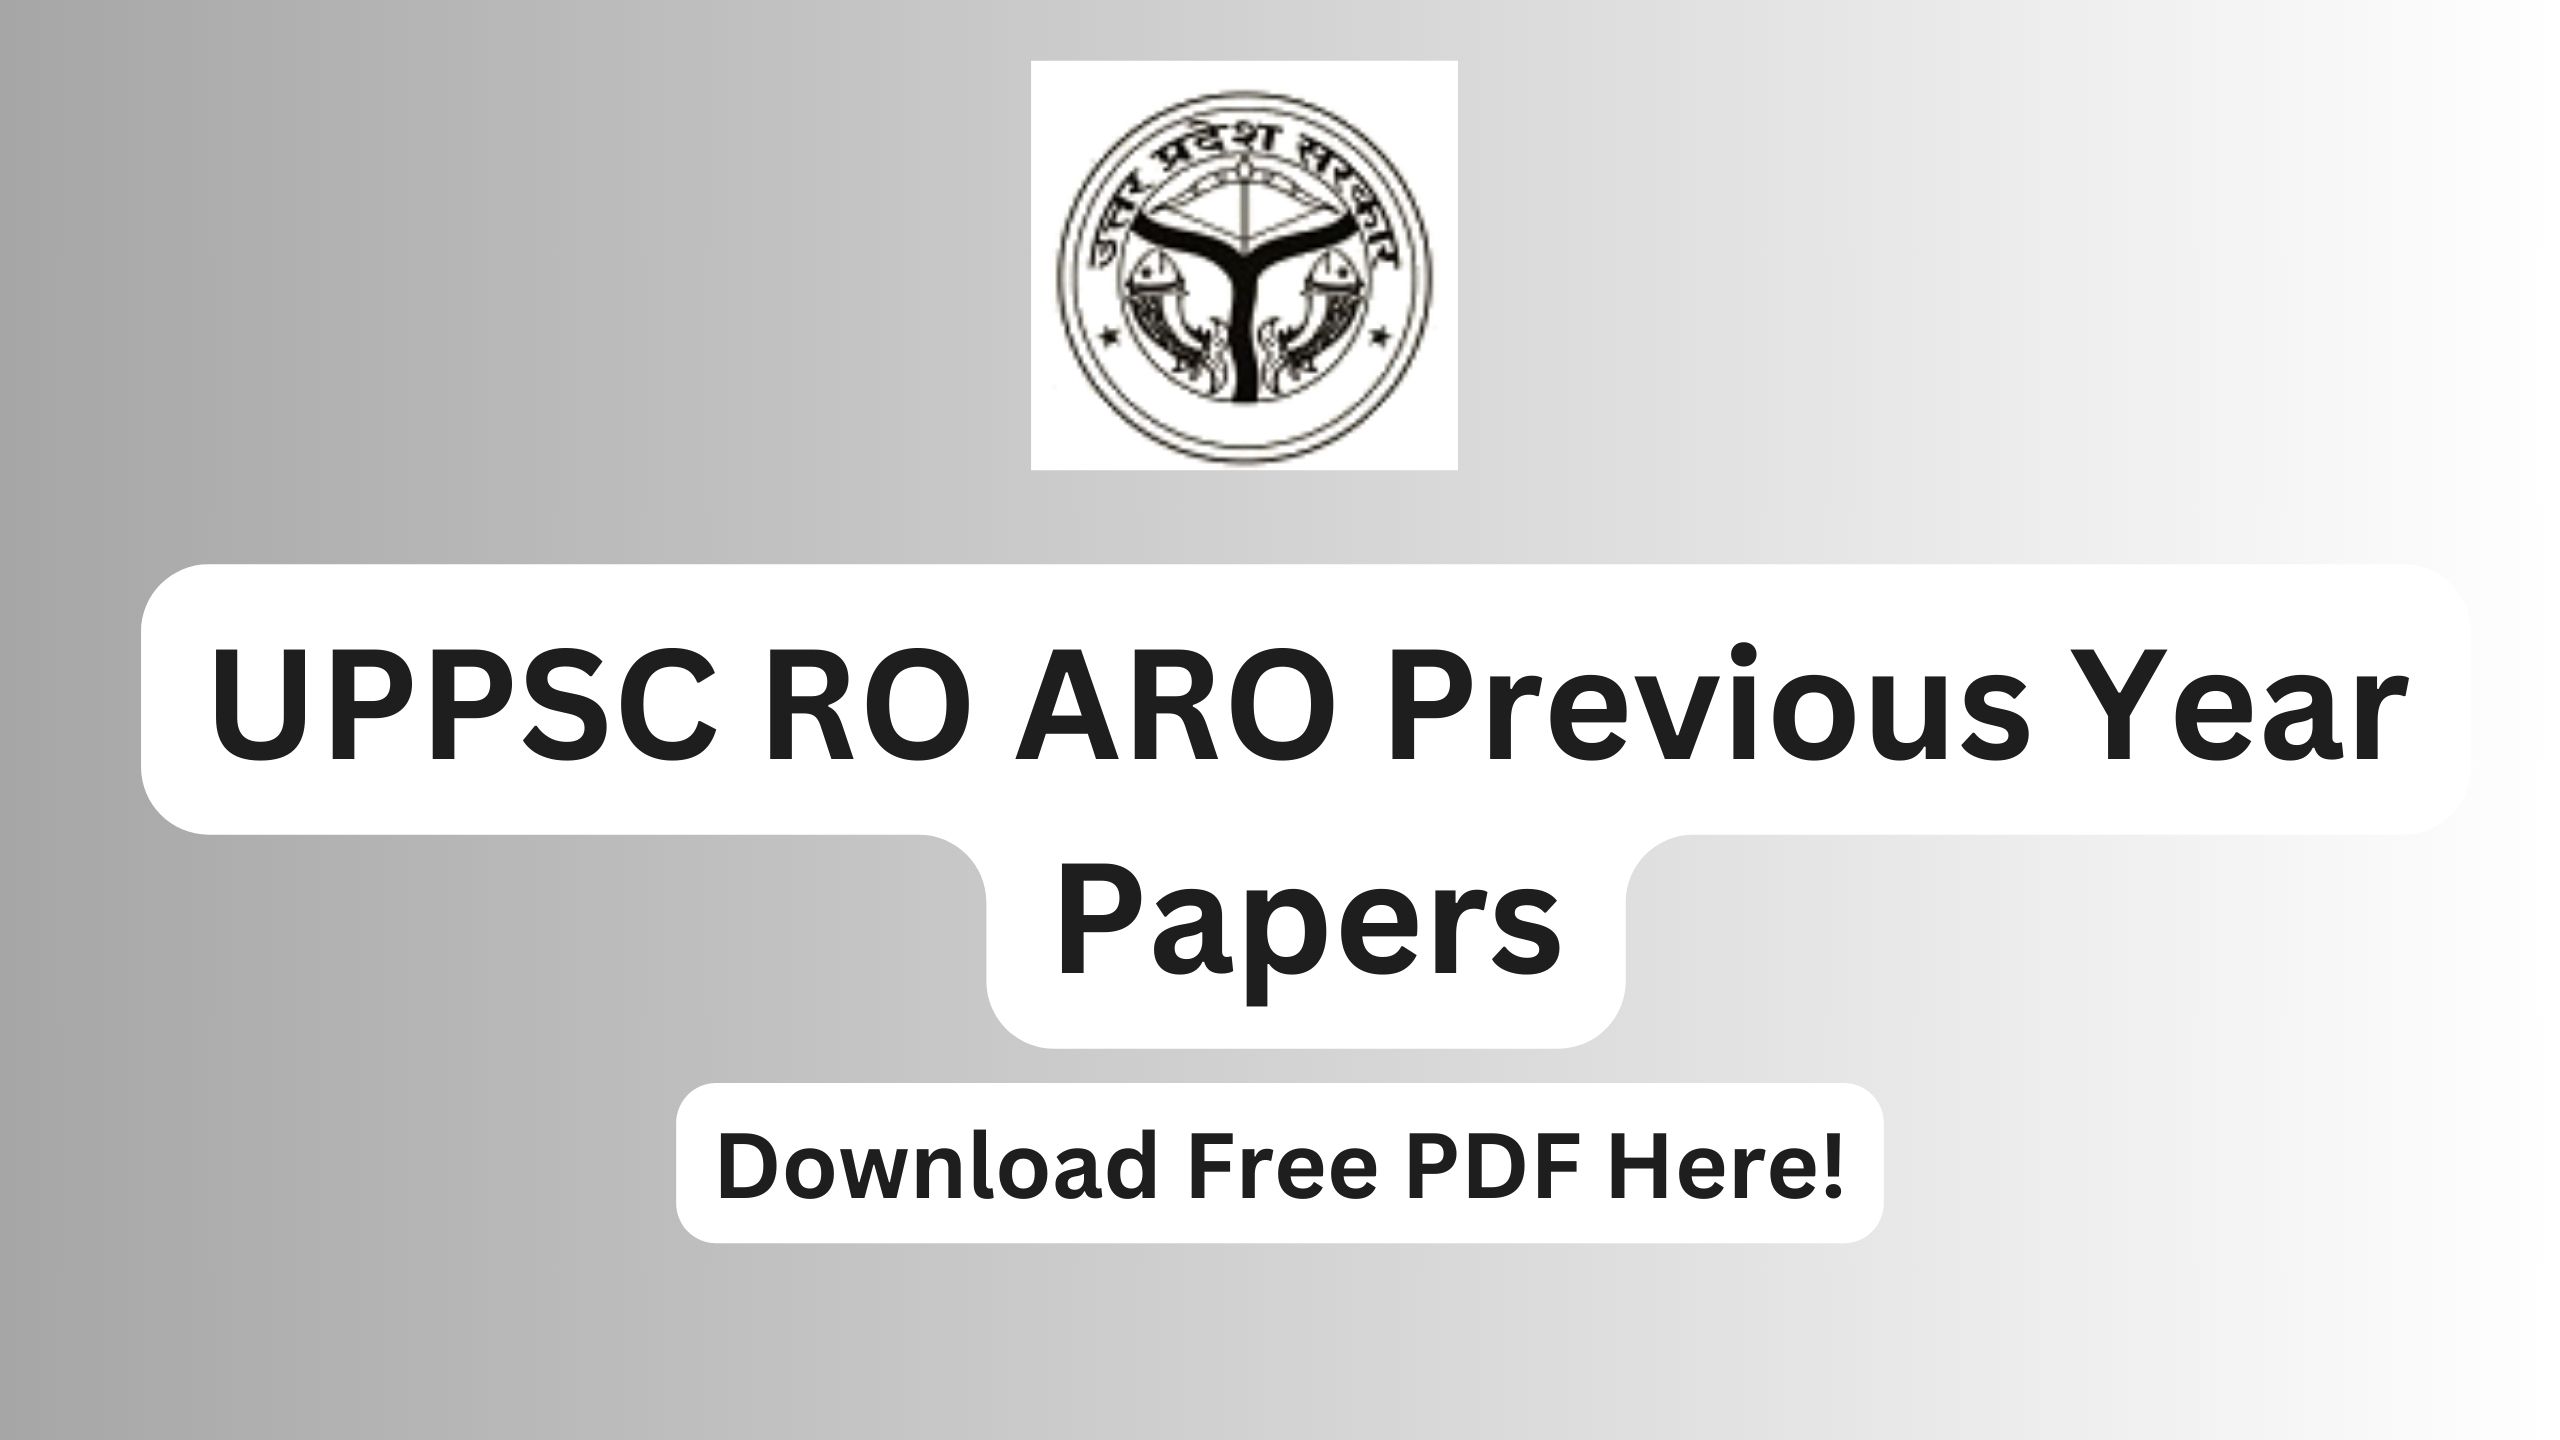 UPPSC RO ARO Previous Year Papers